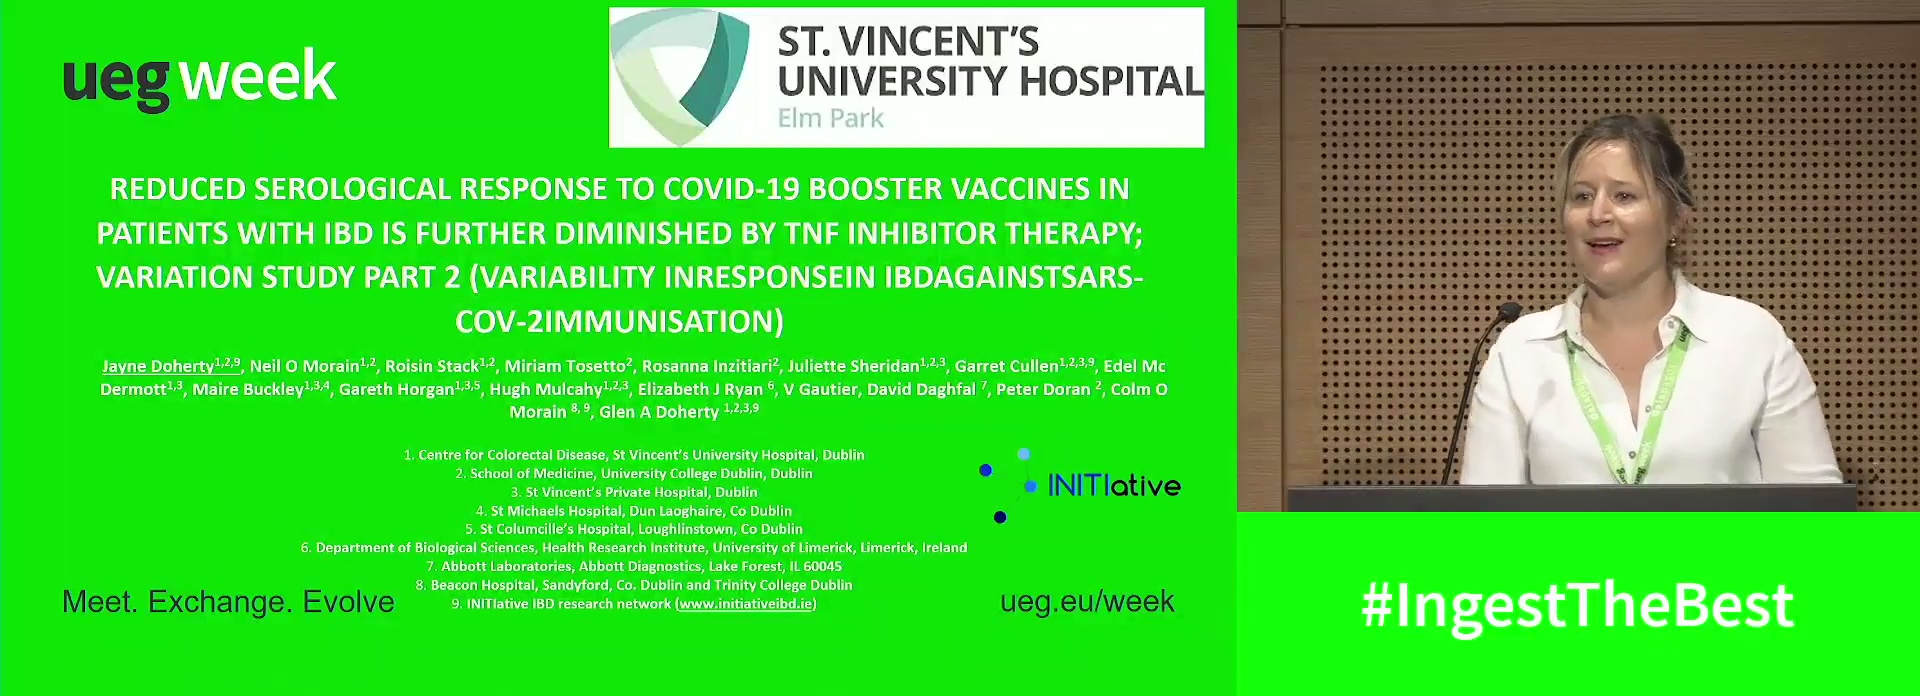 REDUCED SEROLOGICAL RESPONSE TO COVID-19 BOOSTER VACCINES IN PATIENTS WITH IBD IS FURTHER DIMINISHED BY TNF INHIBITOR THERAPY; VARIATION STUDY PART 2 (VARIABILITY INRESPONSEIN IBDAGAINSTSARS-COV-2IMMUNISATION)